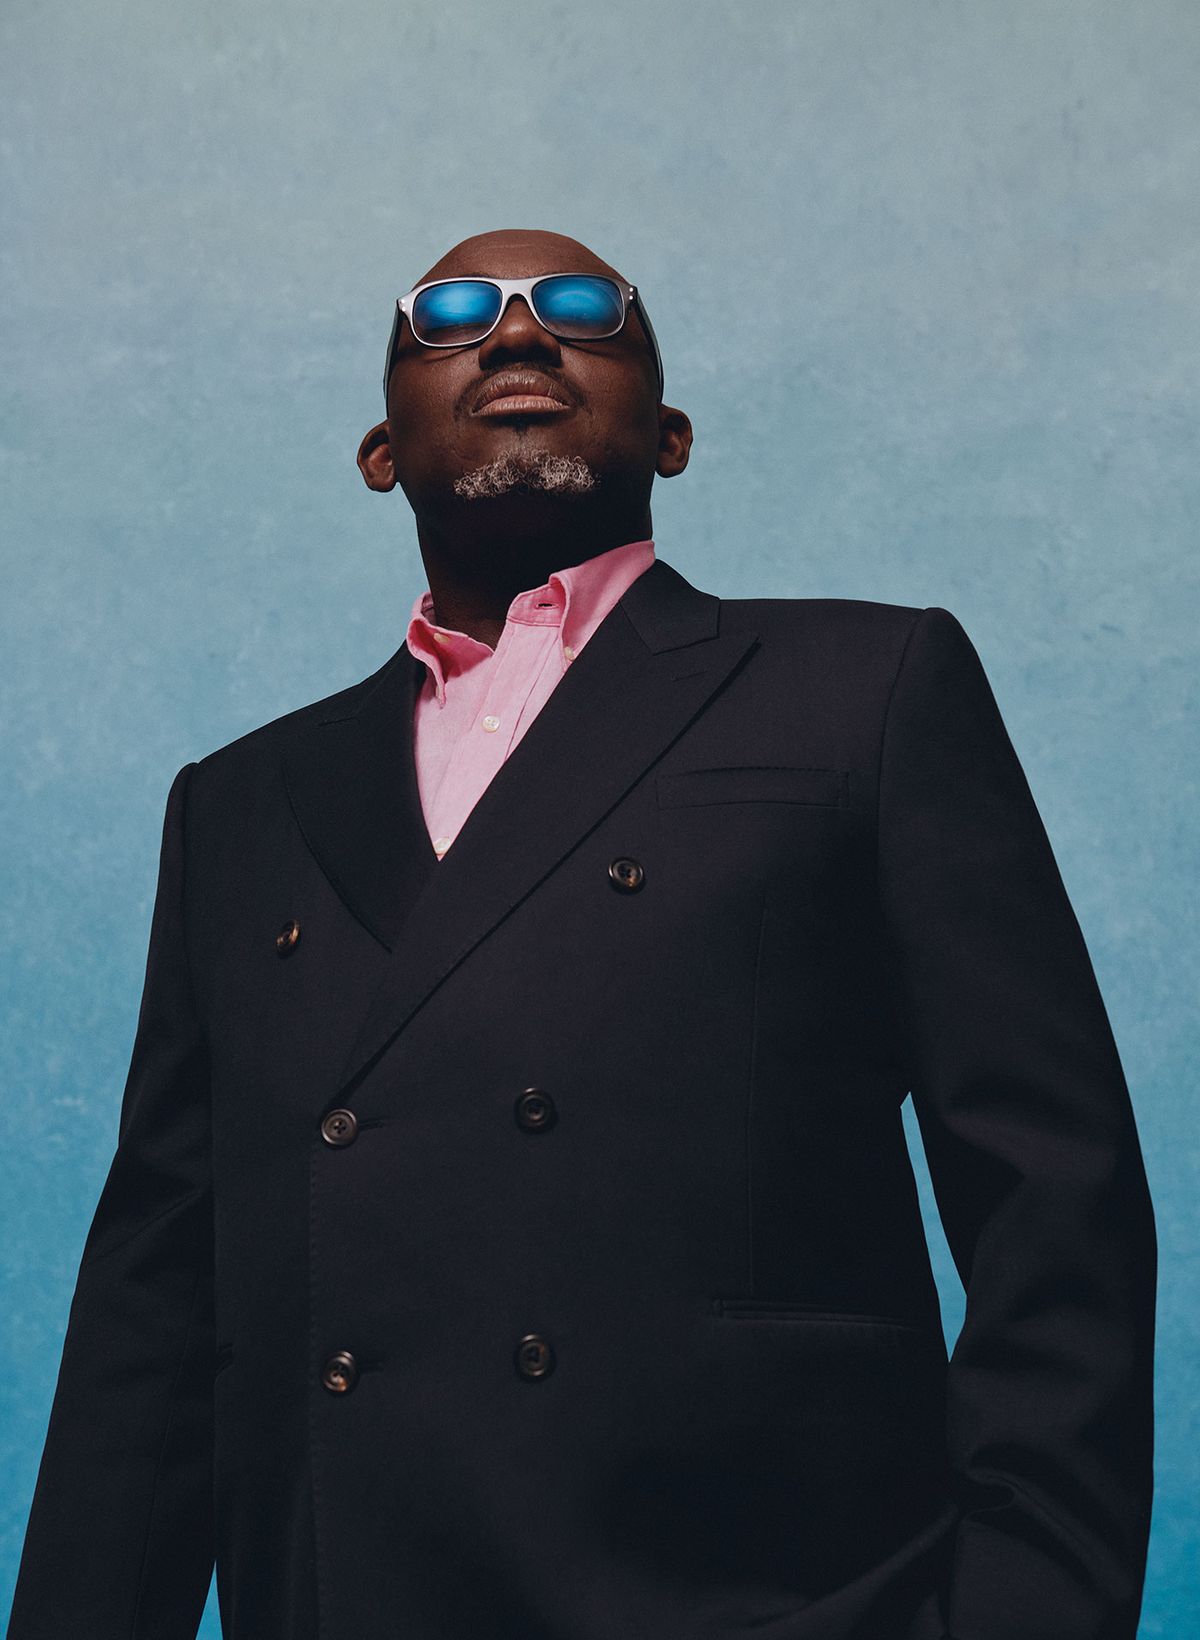 Edward Enninful wears a suit by Alexander McQueen; shirt, Polo Ralph Lauren; glasses, Cutler and Gross Photography by Nadine Ijewere; stylist Susan Bender Whitfield; stylist assistant Talitha Howden; makeup by Joshua Duncan; grooming by Ian Hoyos at Champs Barbers

